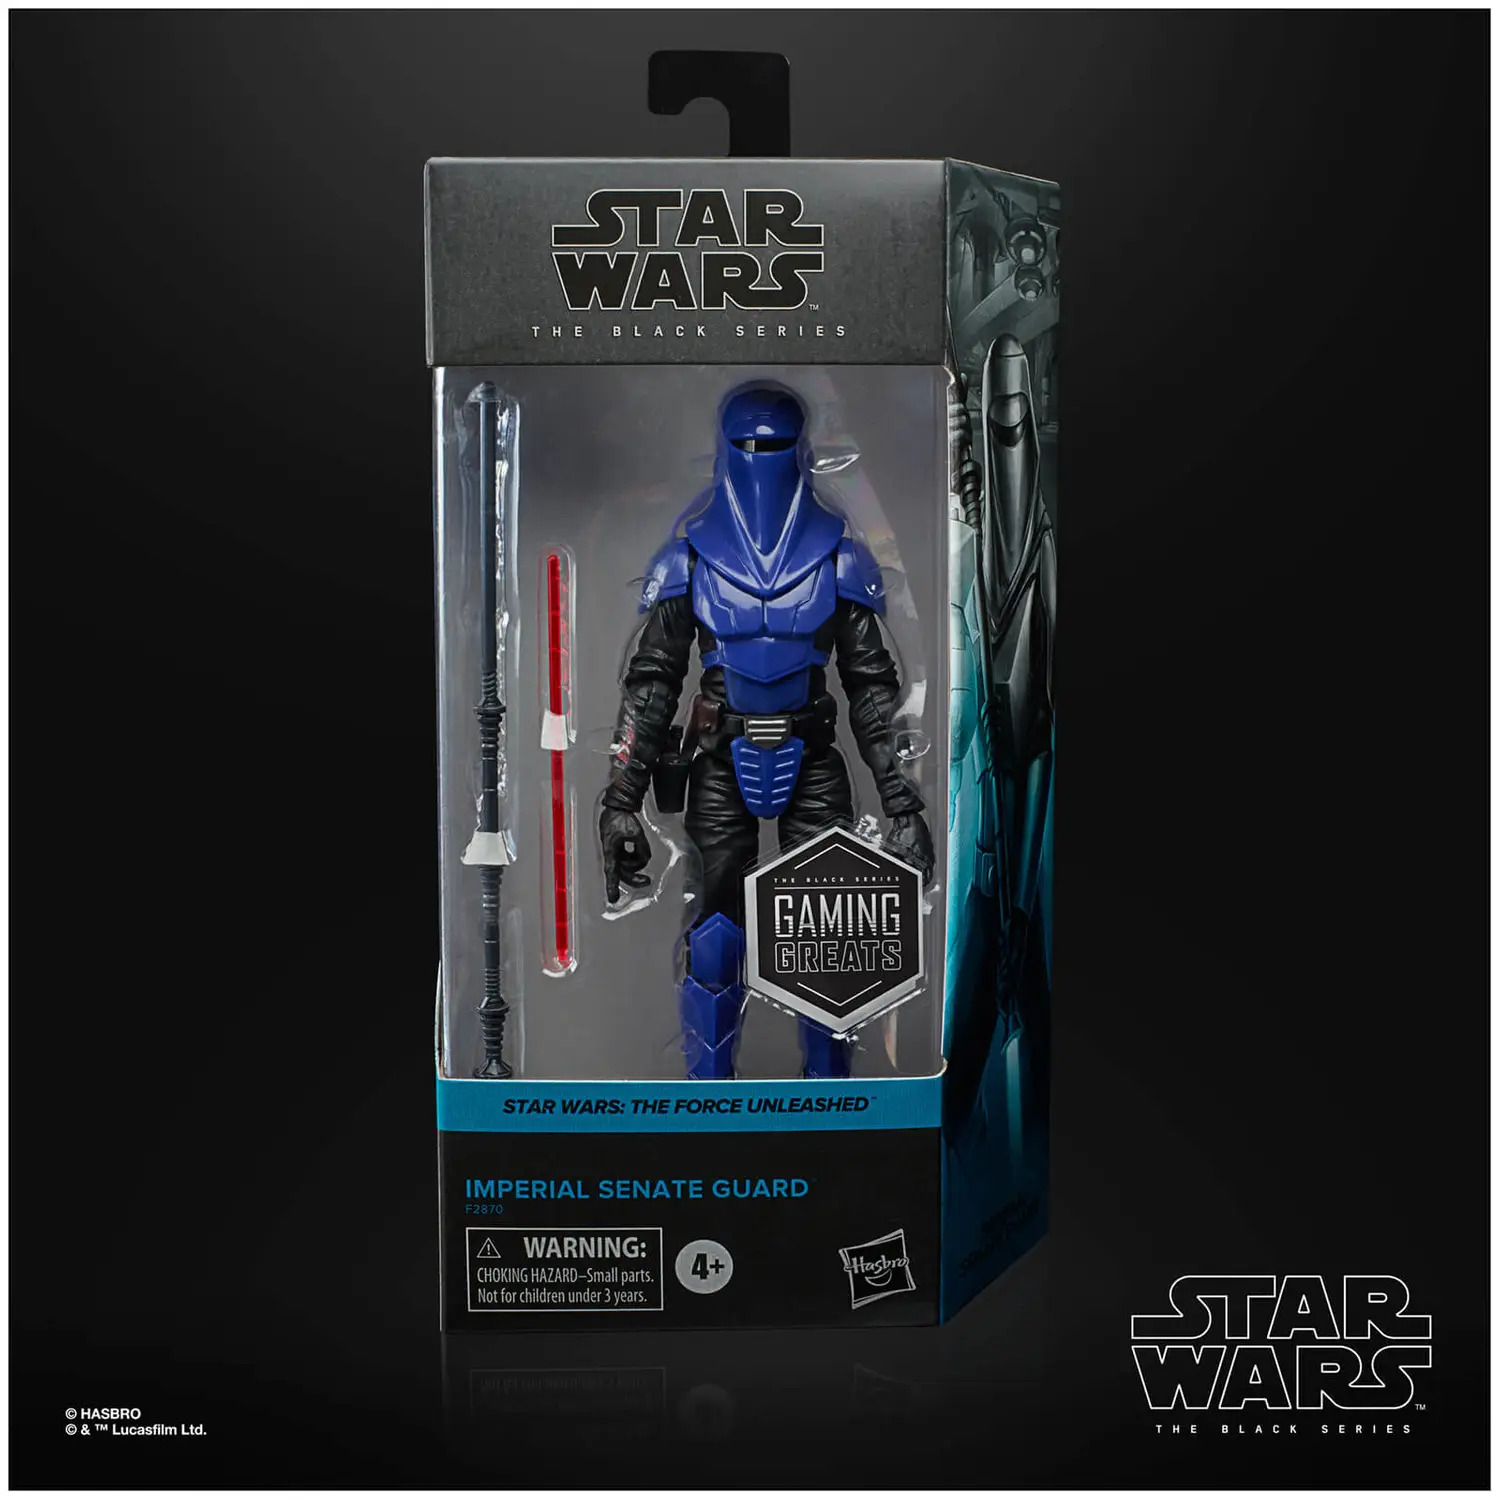 Star Wars The Black Series Gaming Greats Imperial Senate Guard Action Figure F2870 